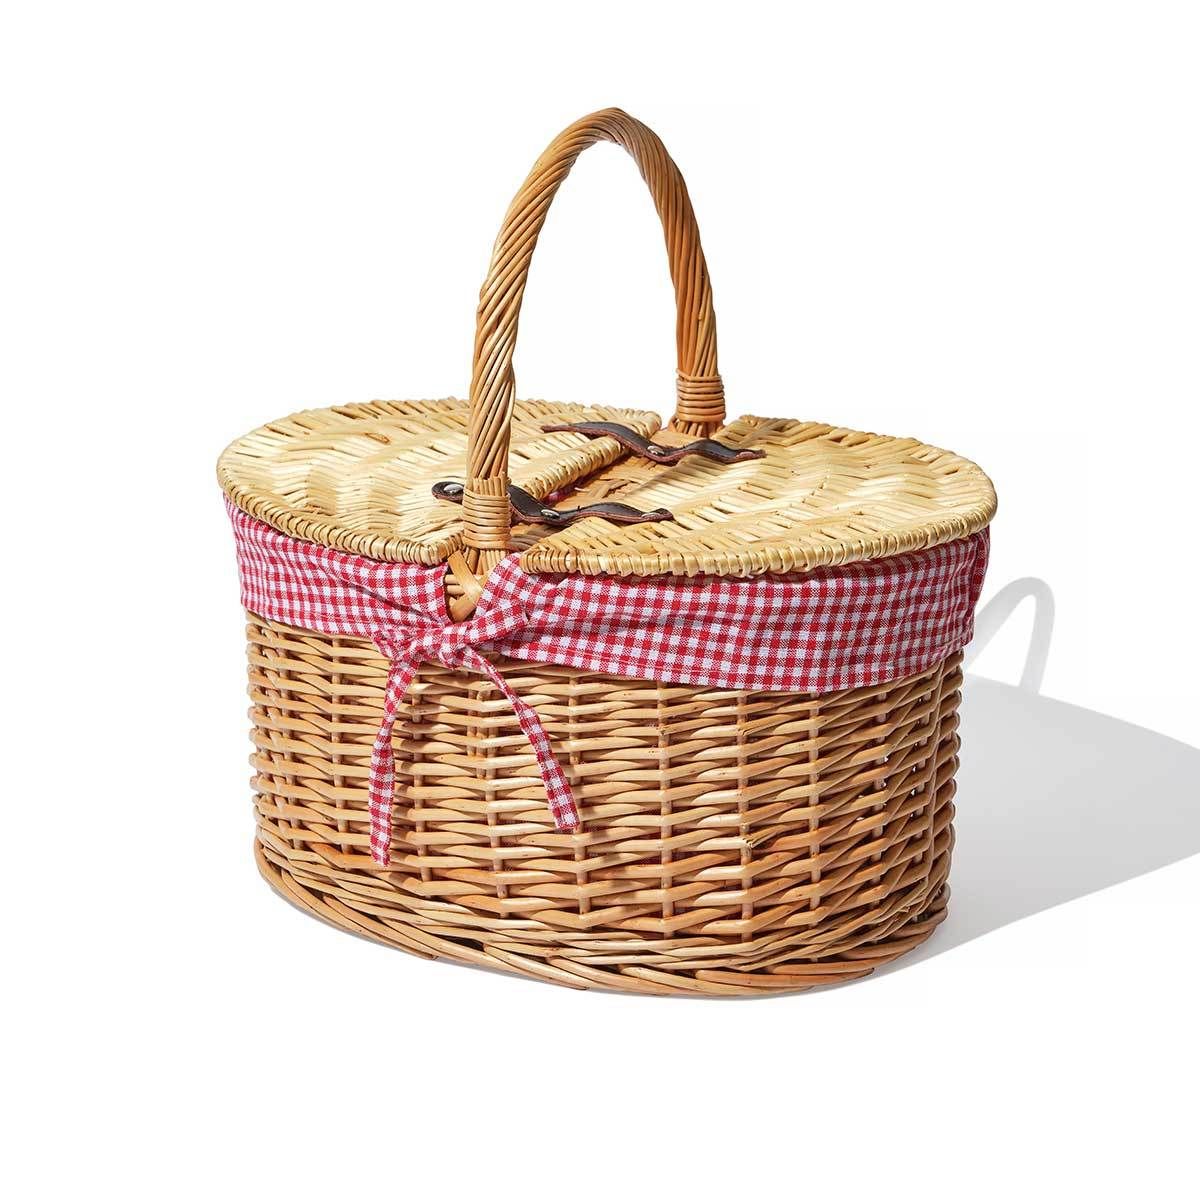 Gingham Picnic Basket | Not Another Bill UK